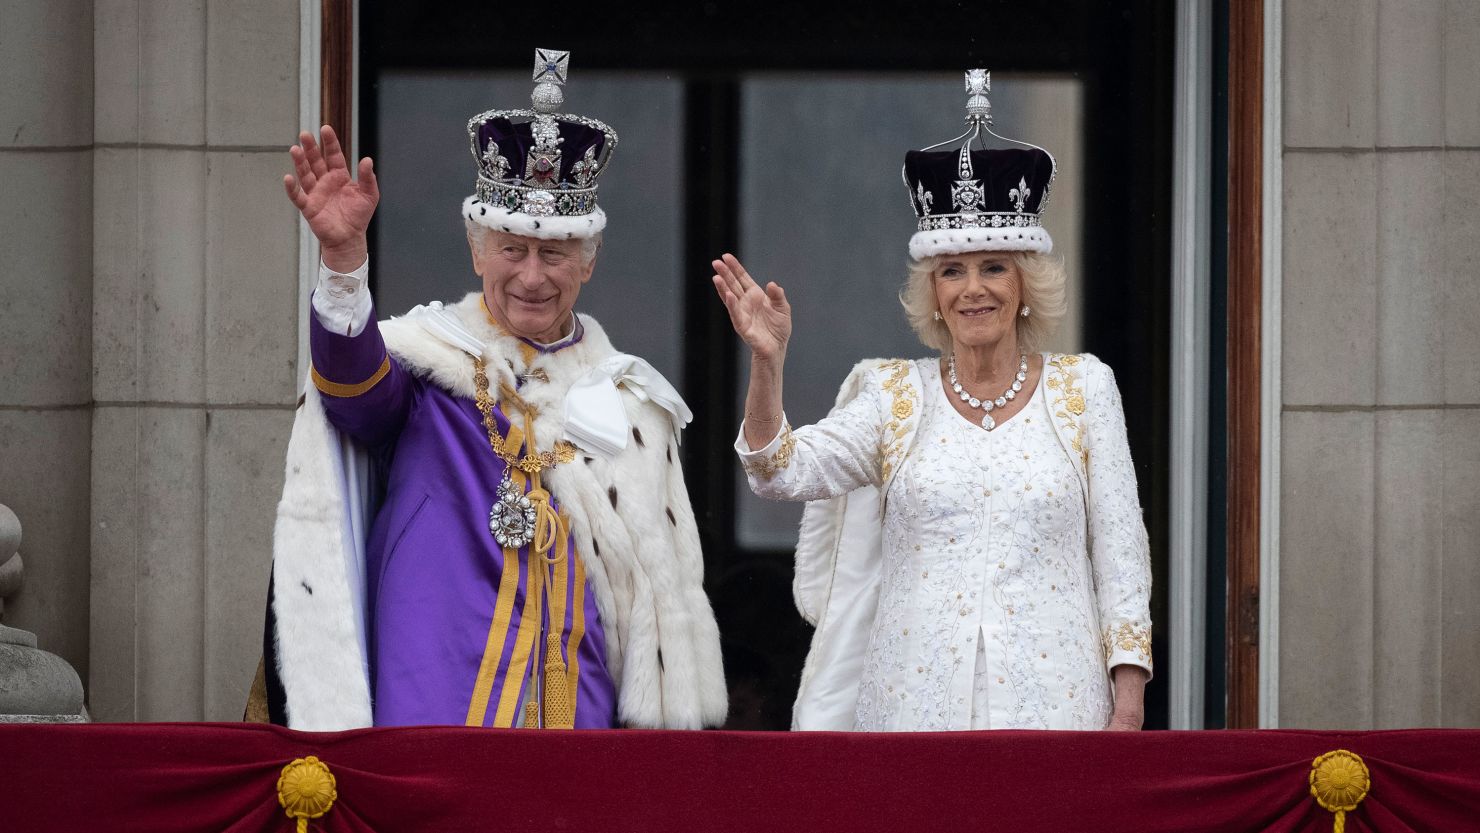 King Charles III and Queen Camilla are seen on the Buckingham Palace balcony on May 06, 2023 in London, England.